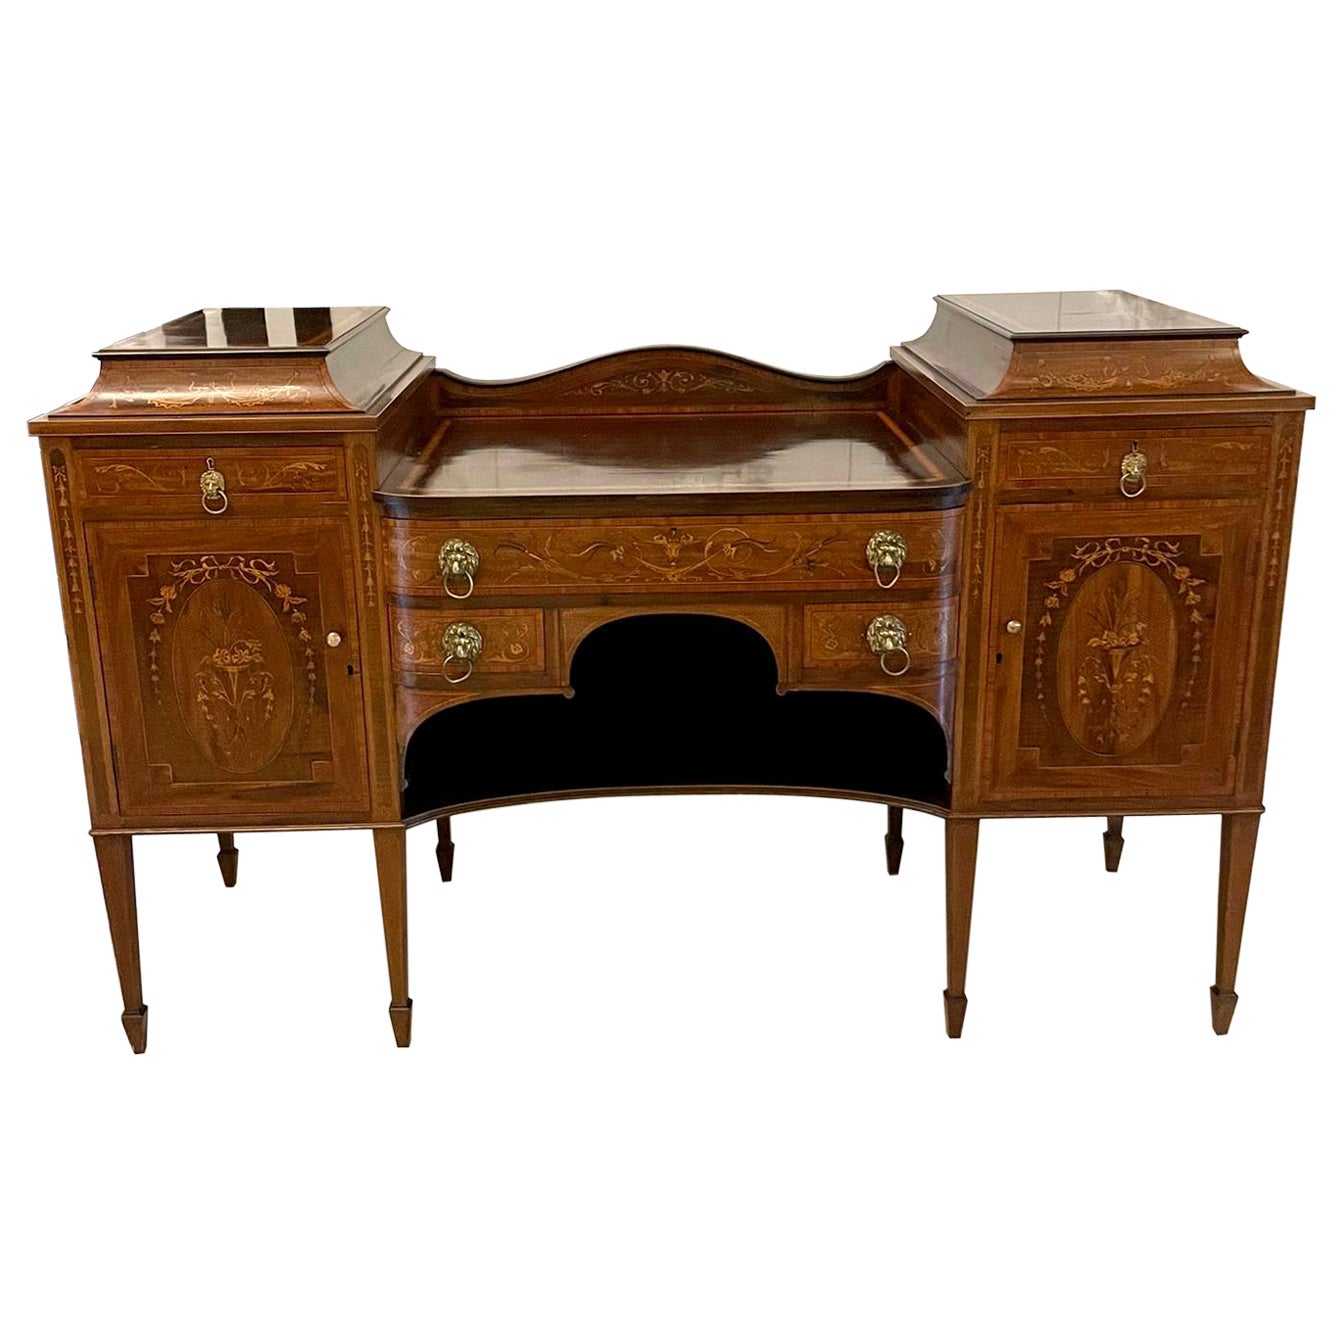 Fine Quality Antique Mahogany Inlaid Marquetry Sideboard By Hewetsons, London For Sale